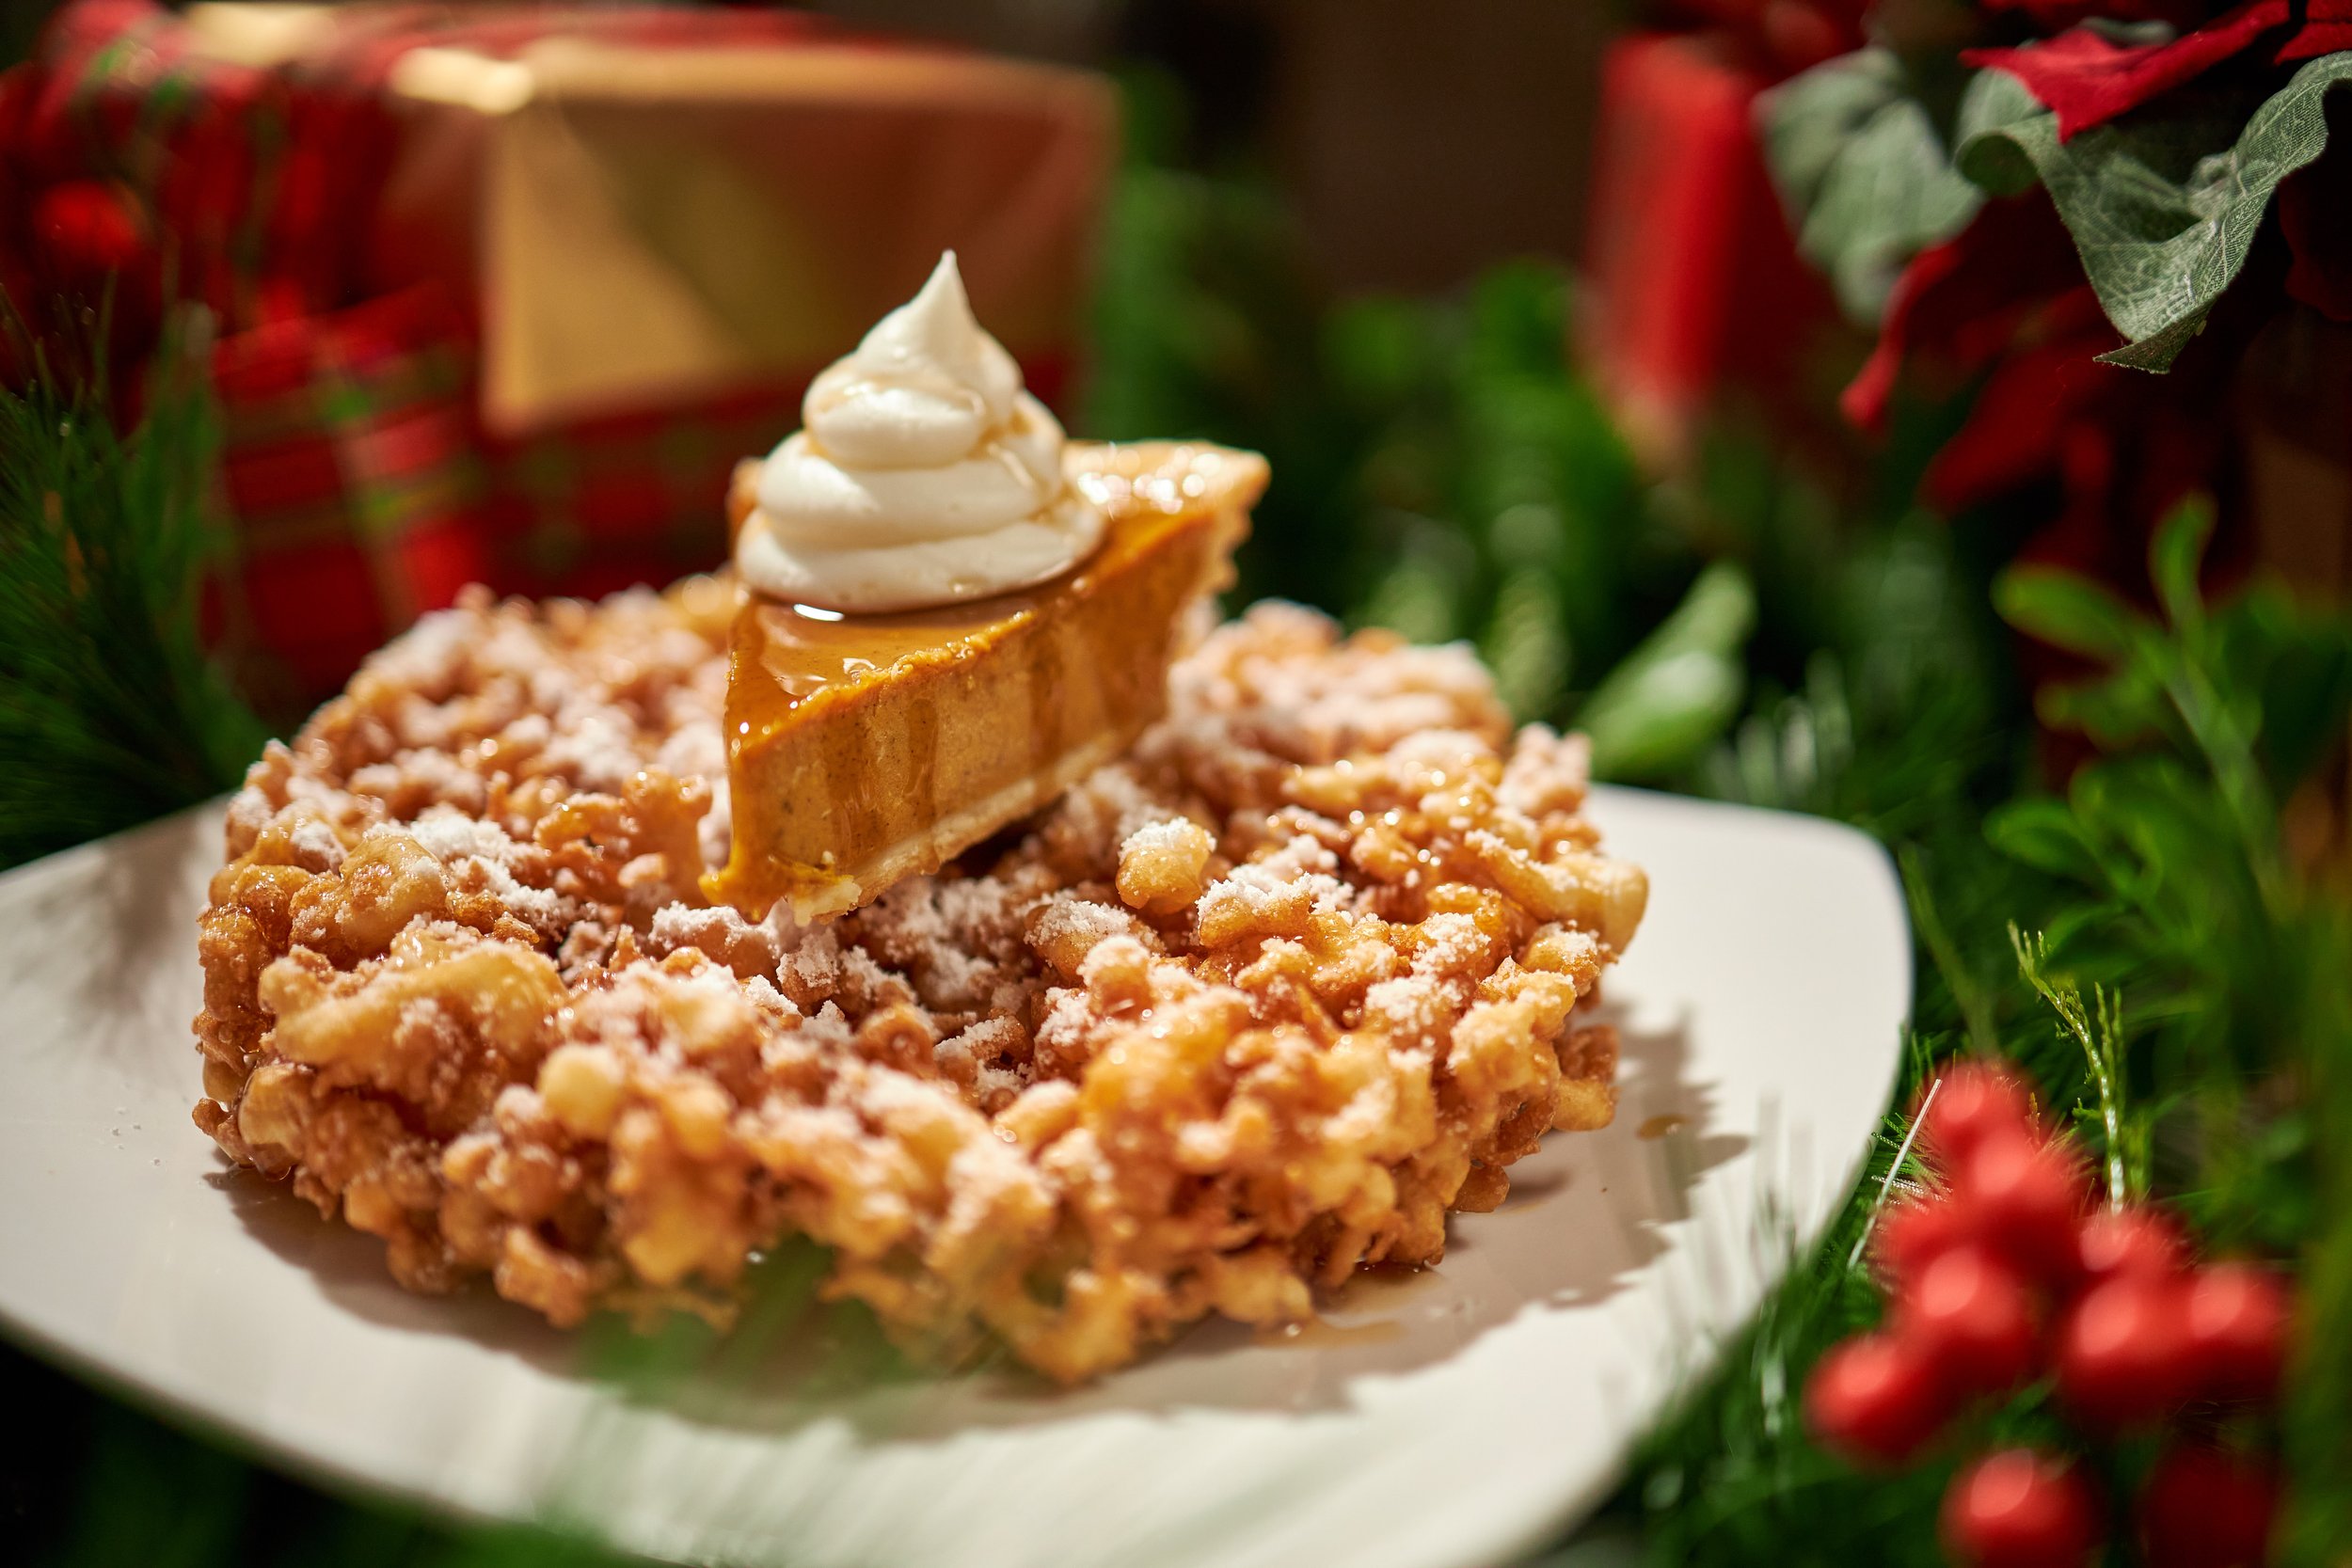 Prancer's Pumpkin Pie Funnel Cake with Maple Syrup and Whipped Cream